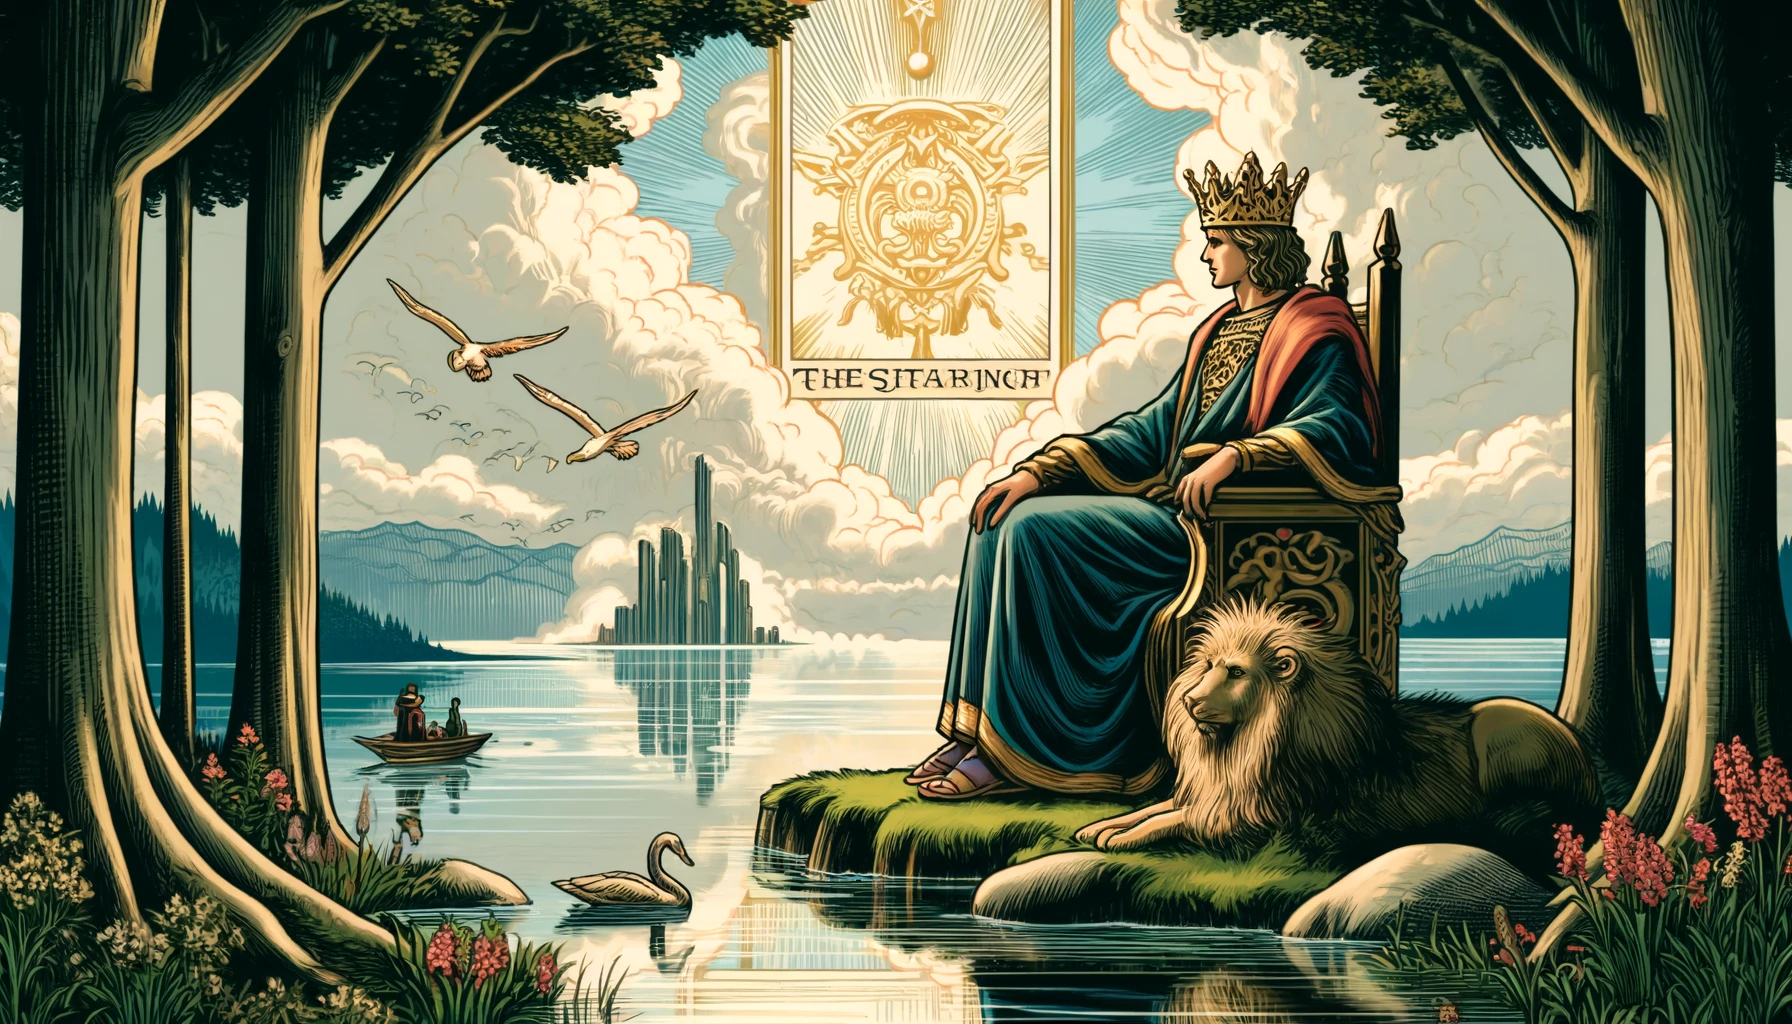 The image depicts the essence of wisdom, emotional balance, and leadership embodied by the King of Cups. Set in a tranquil environment, possibly near water, it symbolizes emotional depth and intuition. The King, a figure of authority and guidance, exudes maturity and empathy, offering support and counsel in complex emotional situations.